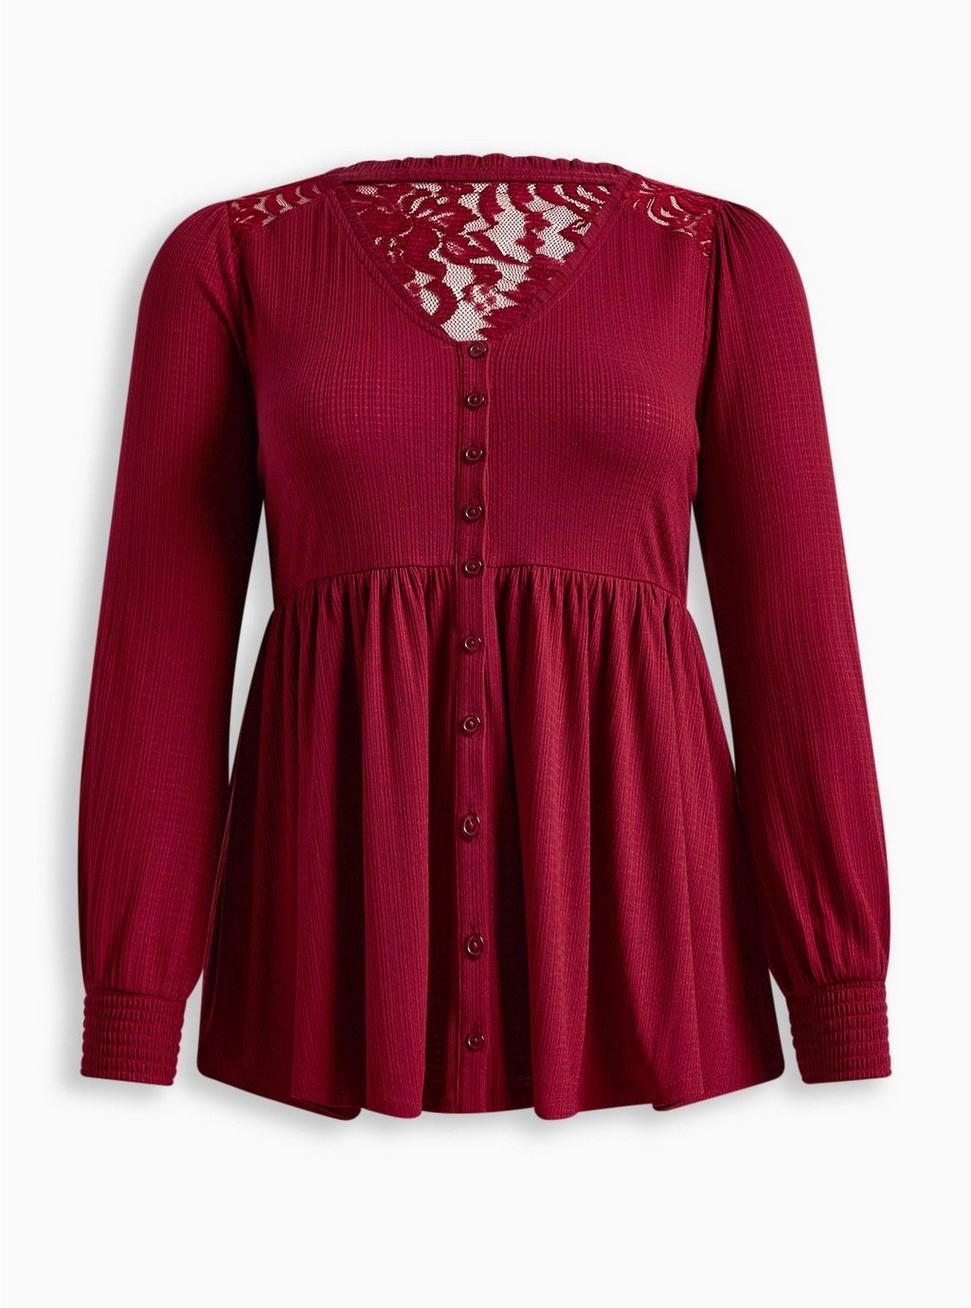 Babydoll Knit V-Neck Button-Front Lace Inset Peasant Sleeve Top, RHUBARB, hi-res